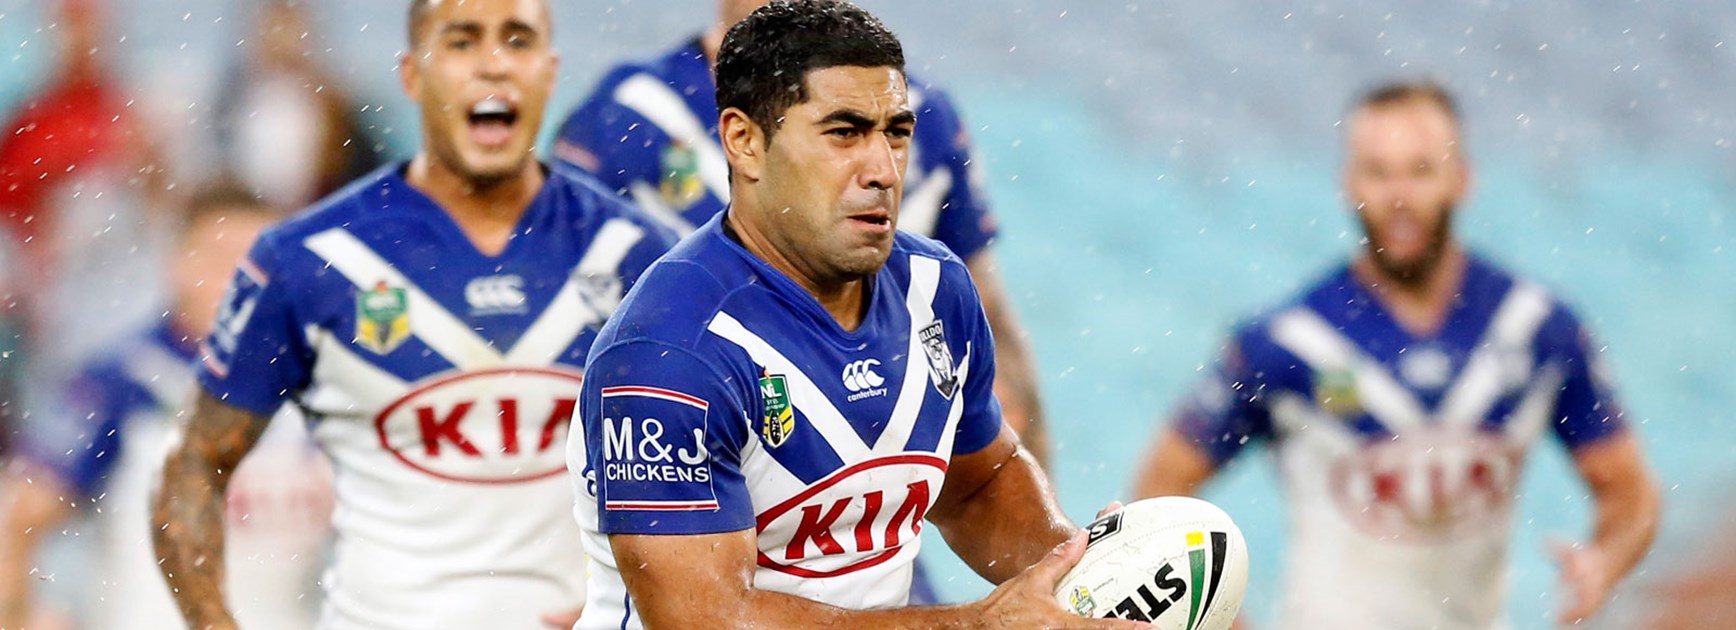 Fualalo charged over lifting tackle